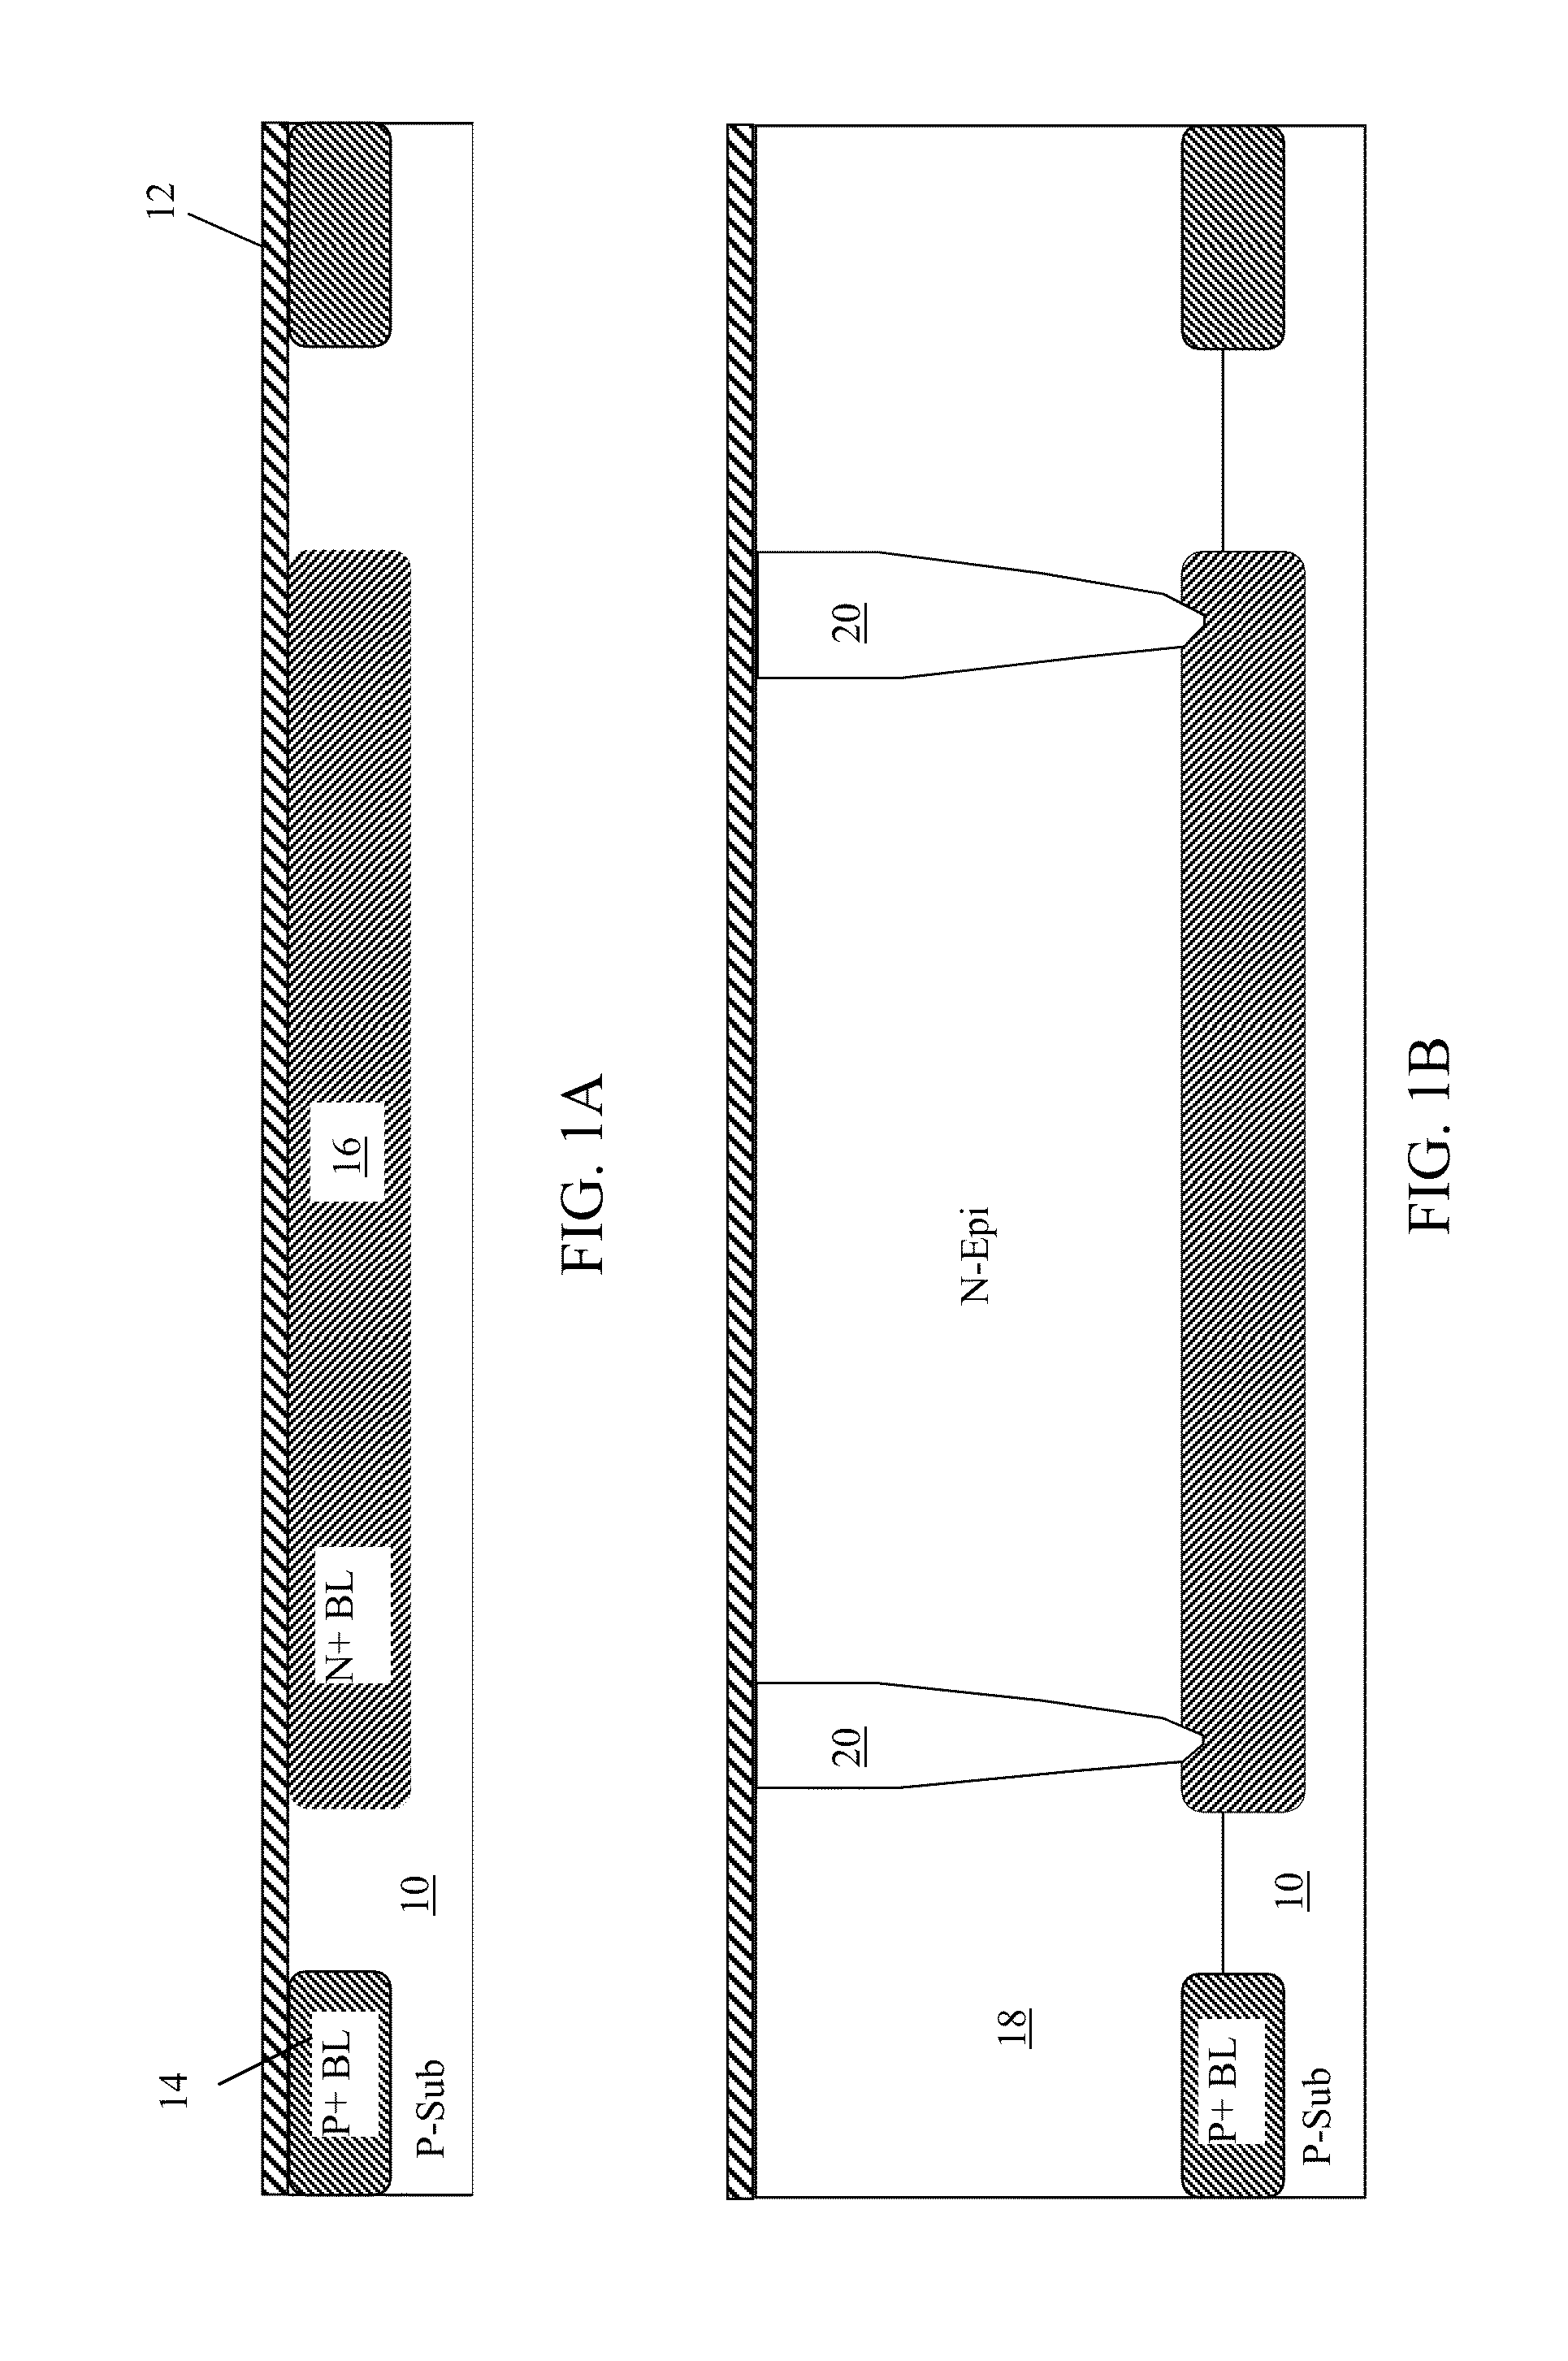 Lateral PNP Bipolar Transistor Formed with Multiple Epitaxial Layers